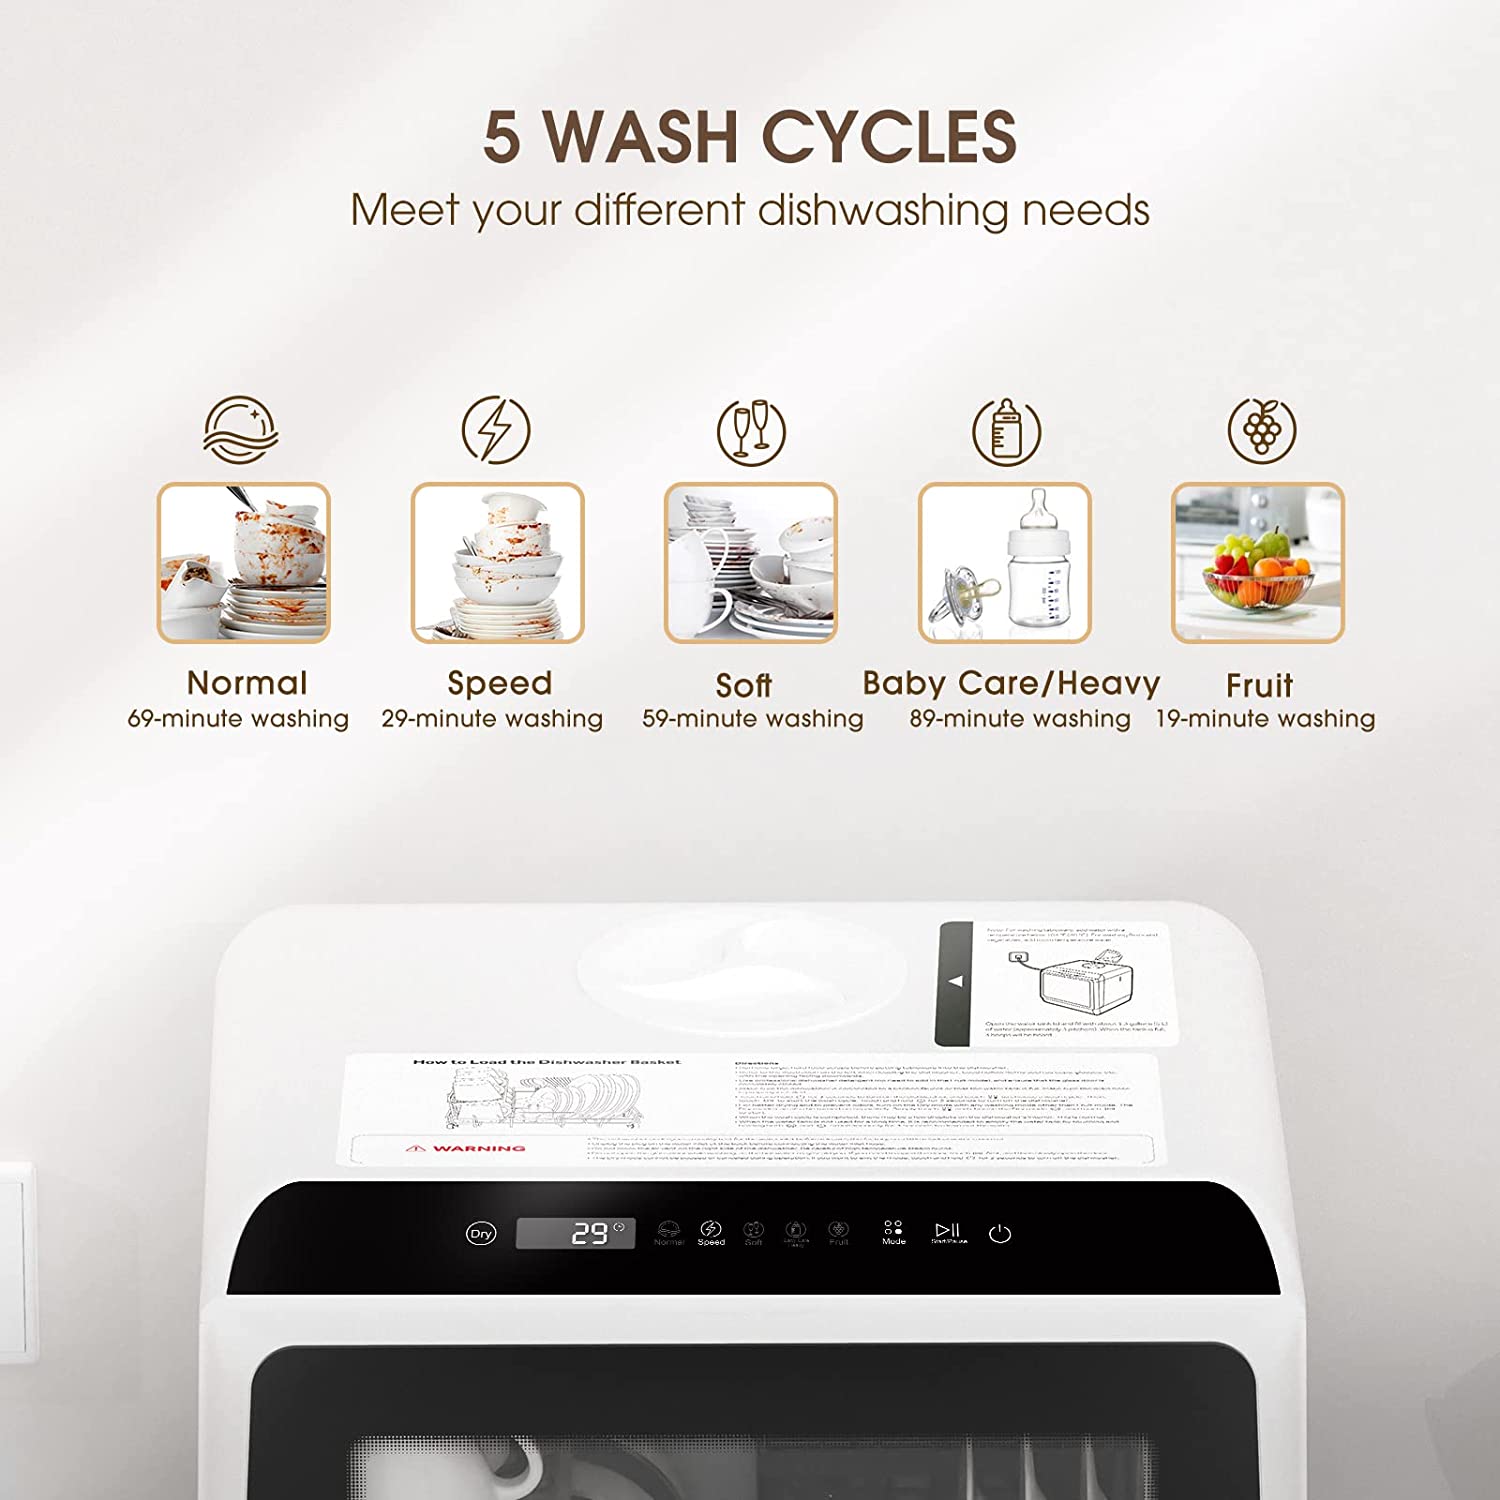 Detailed product information about a compact portable dishwasher.